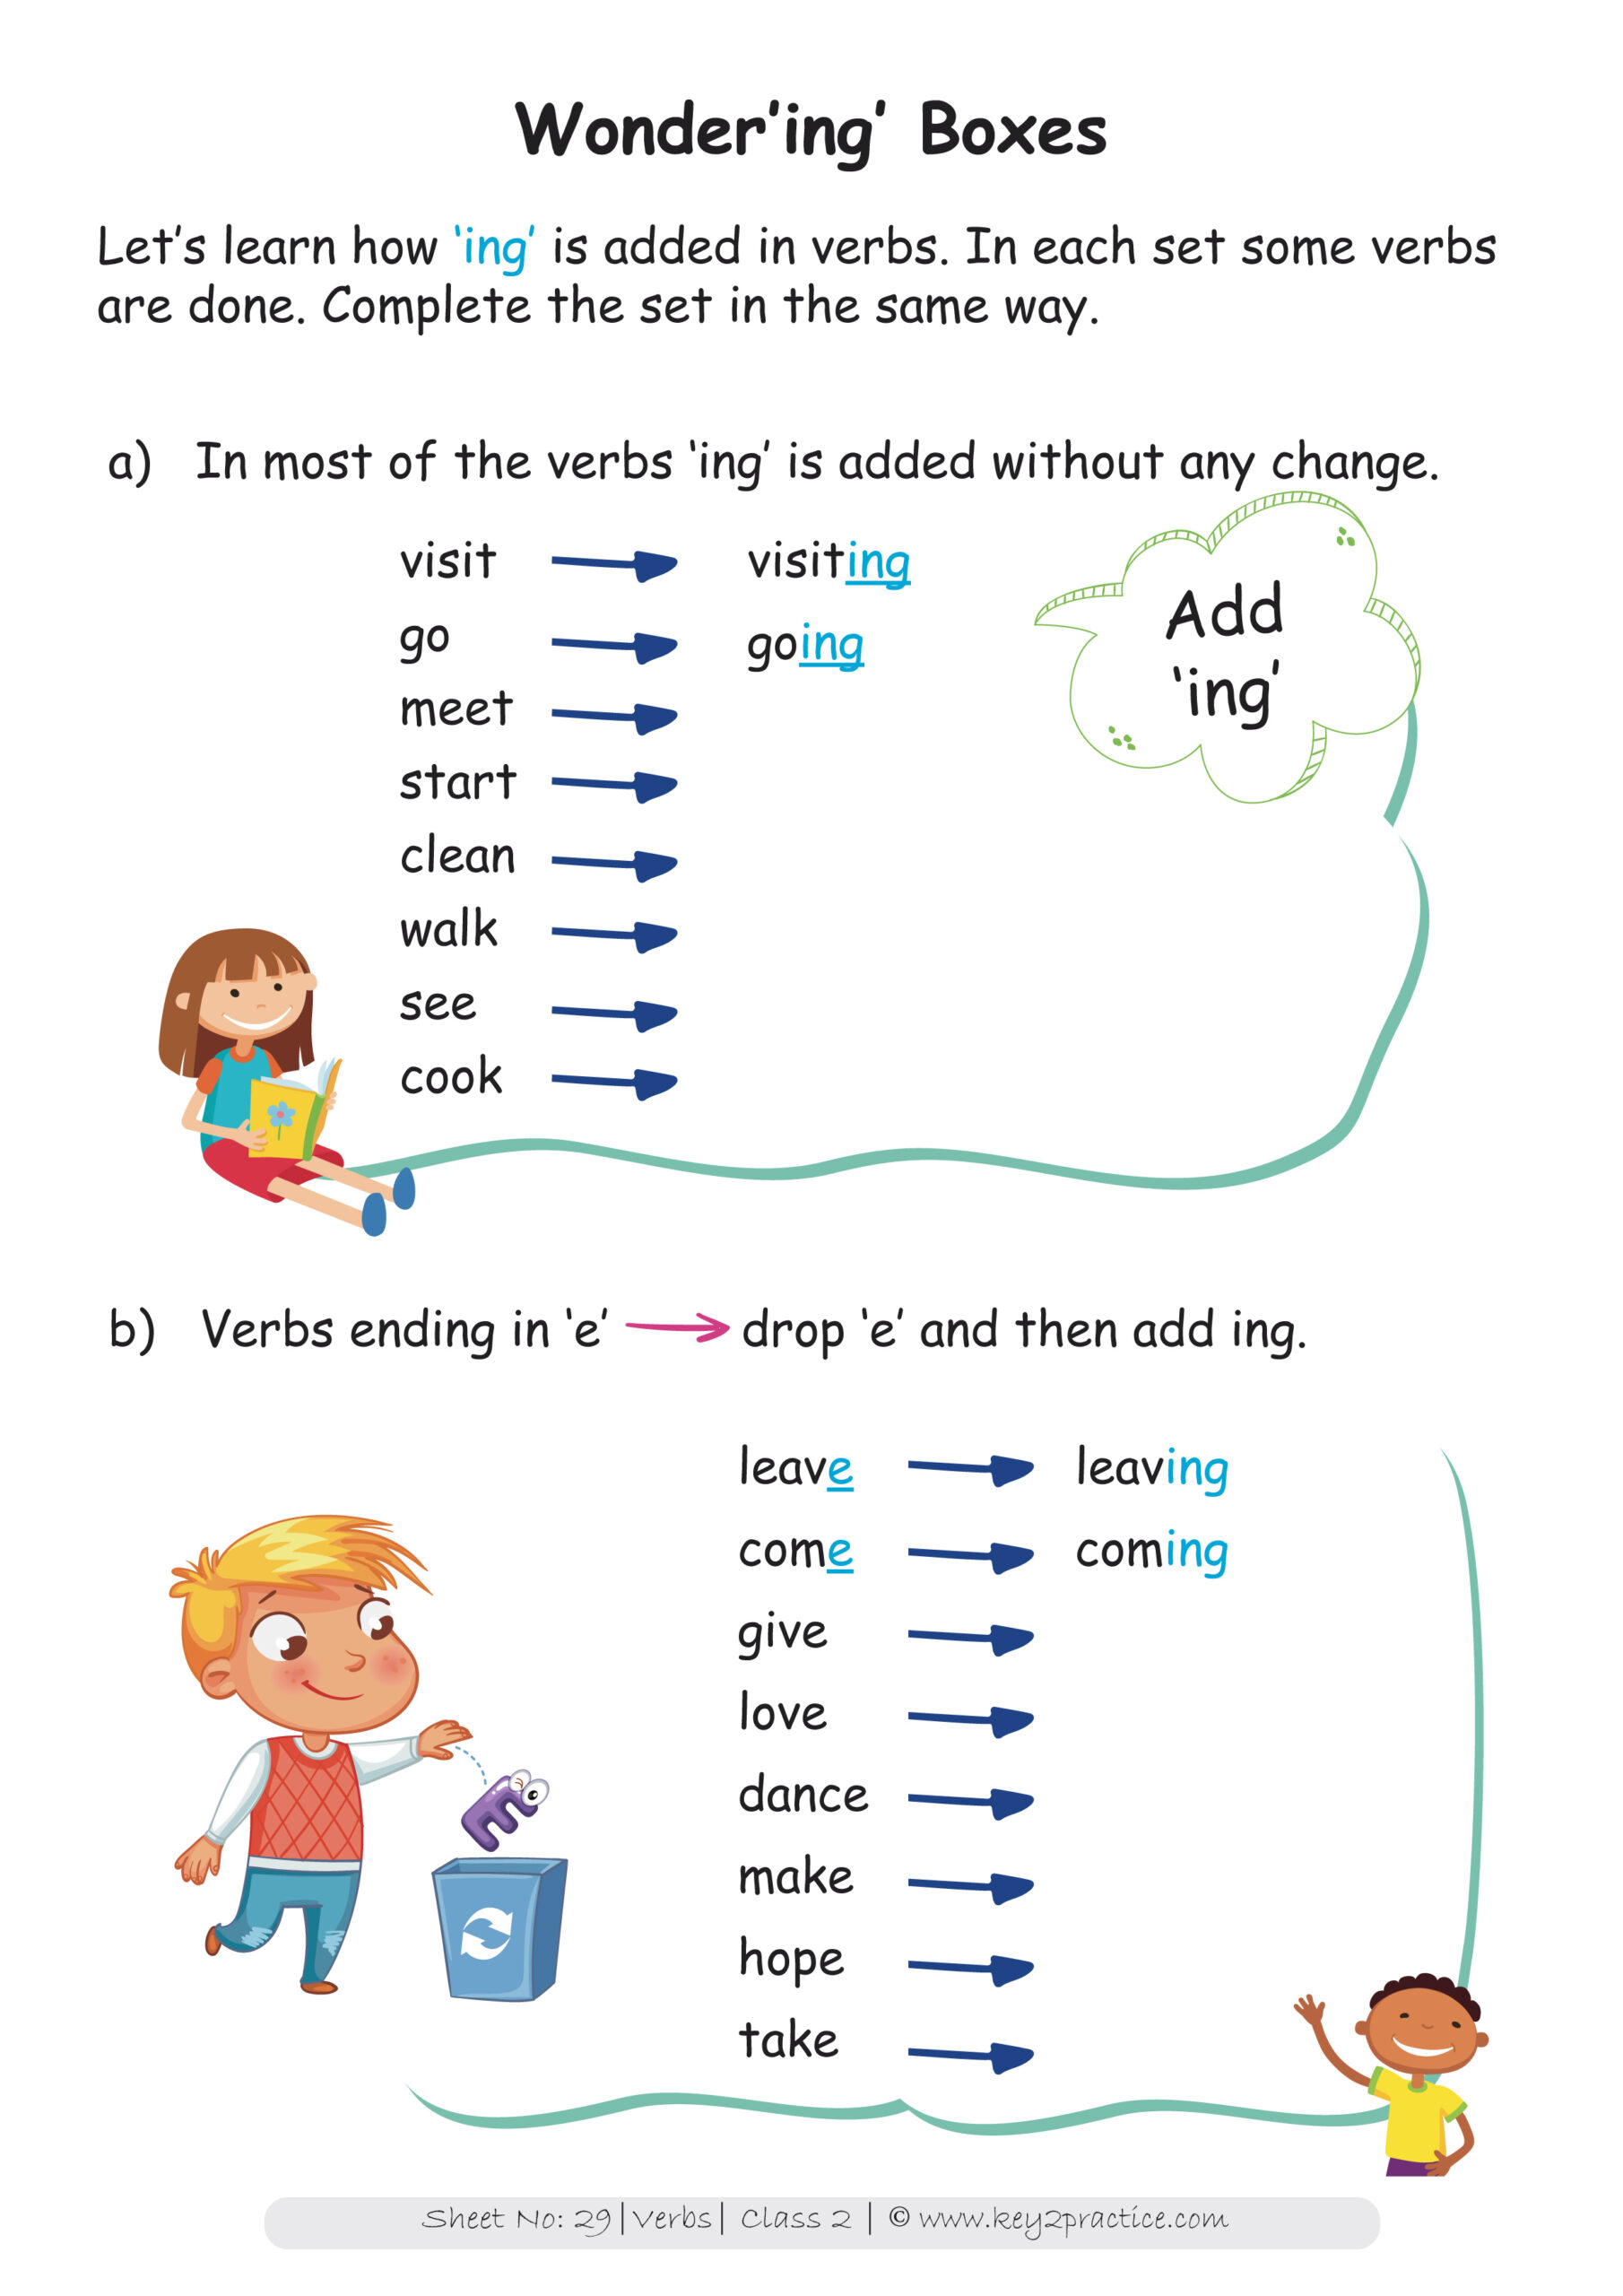 Worksheets For Class 2 English CBSE Class 2 English Worksheets 